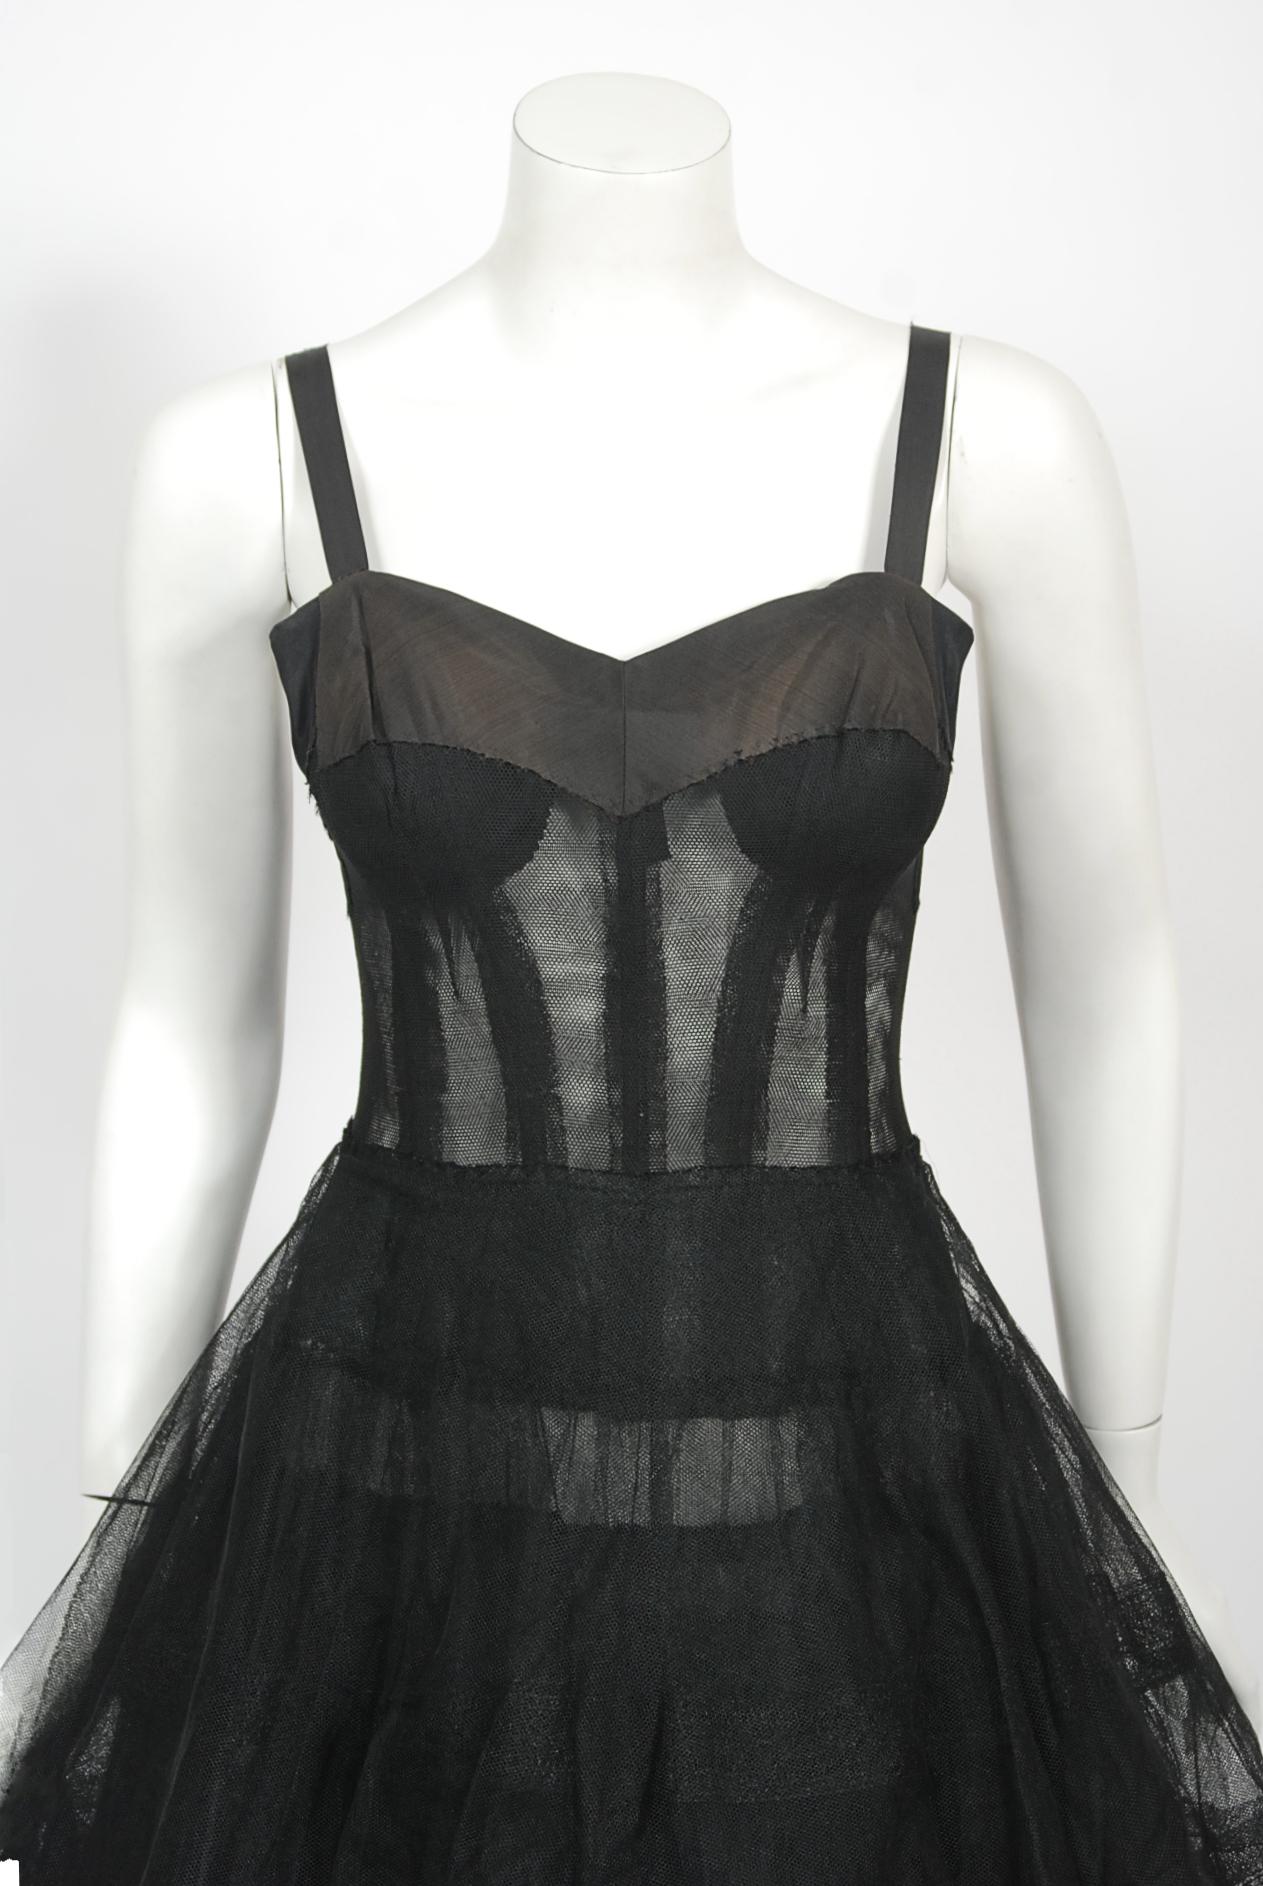 Vintage 1956 Christian Dior Haute Couture Documented Black Silk 'New Look' Dress 7